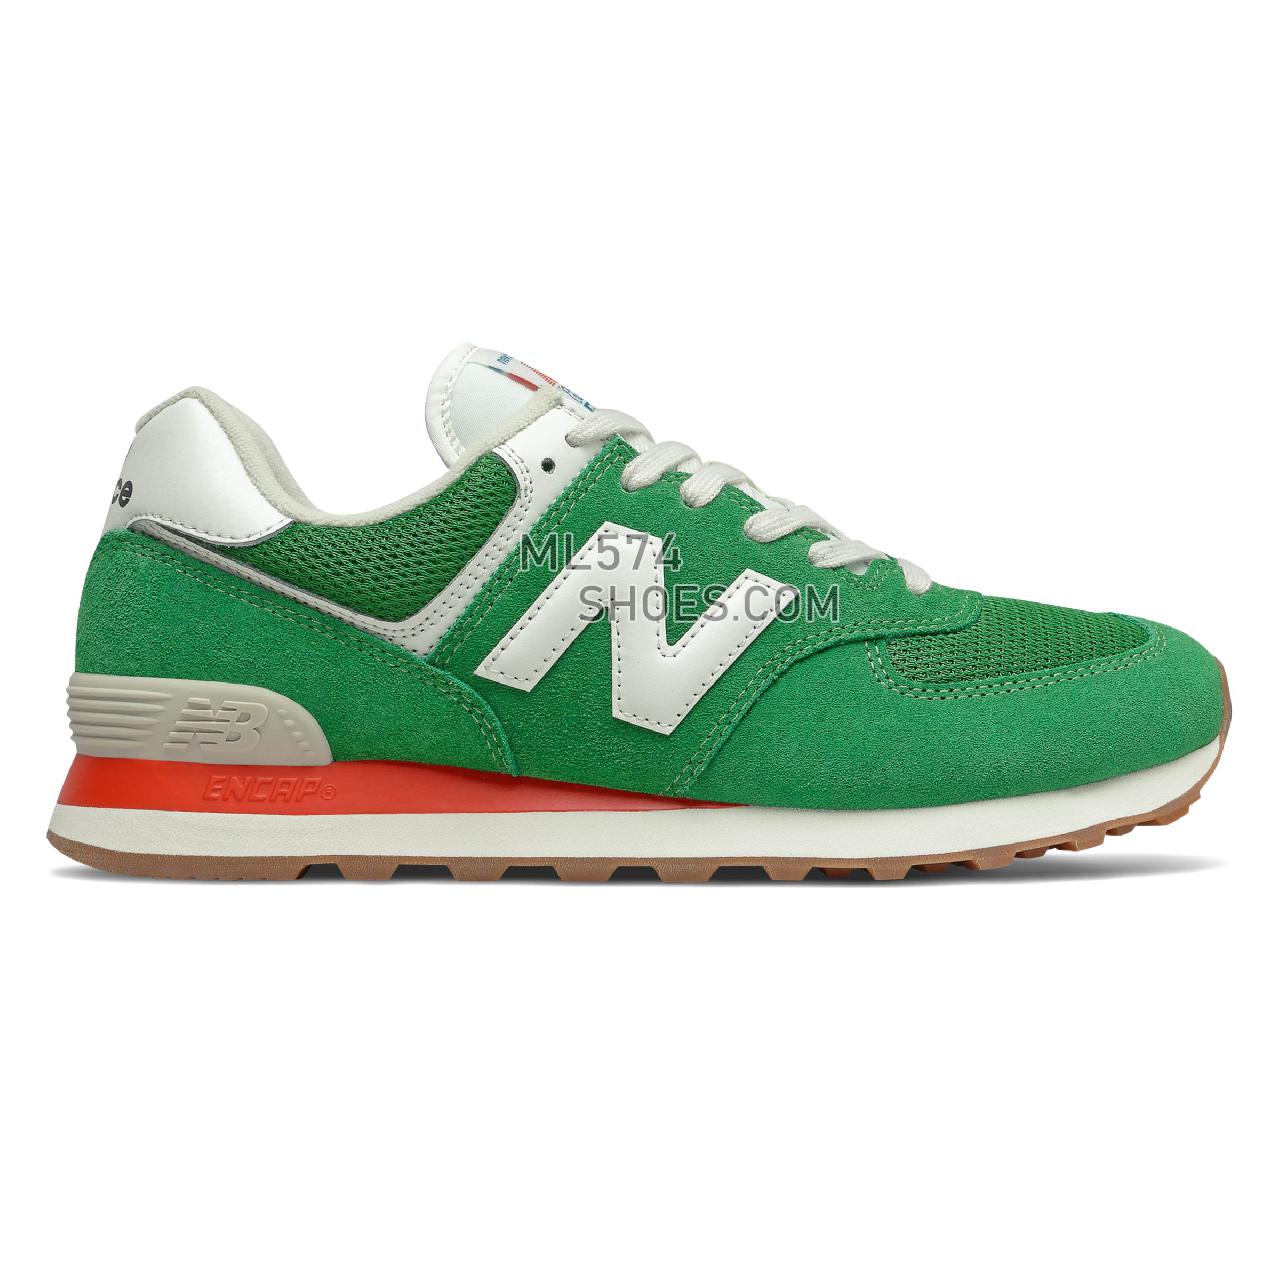 New Balance 574v2 - Men's Classic Sneakers - Varsity Green with Velocity Red - ML574HE2